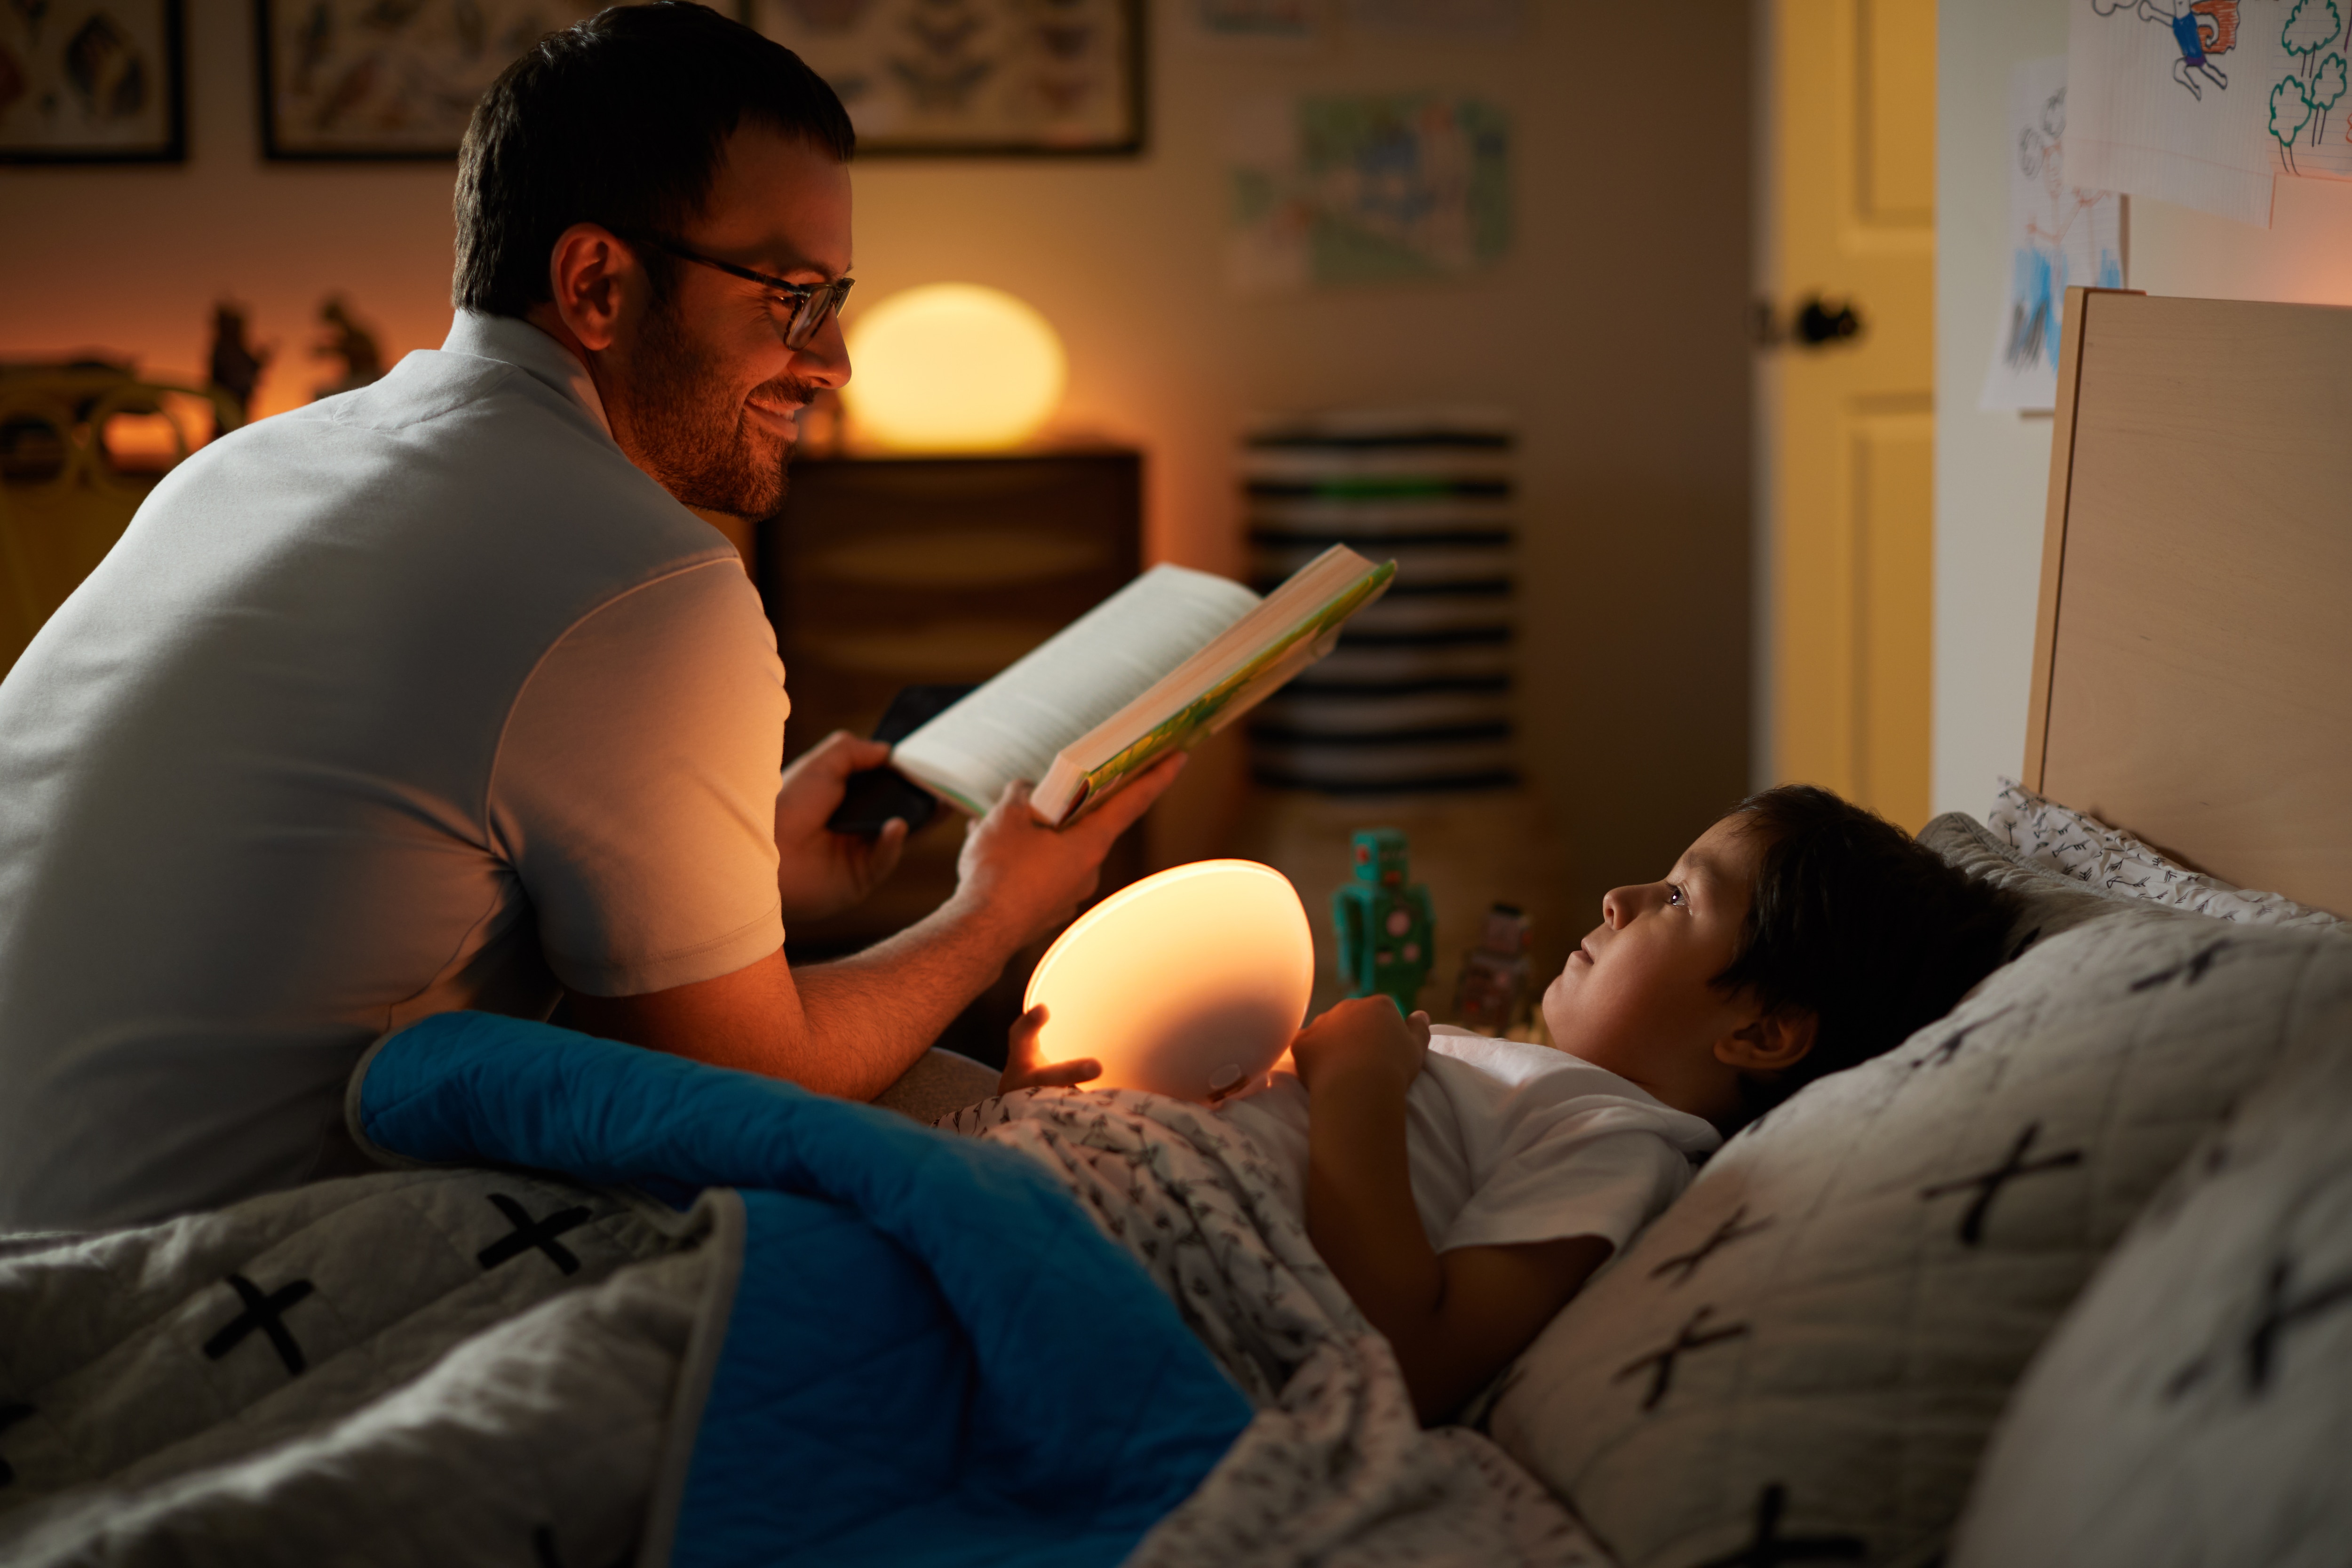 Hey wake me up at 6 a.m. tomorrow.” Philips Hue brings voice commands to your sleep and wake up feature with the Google Assistant | Signify